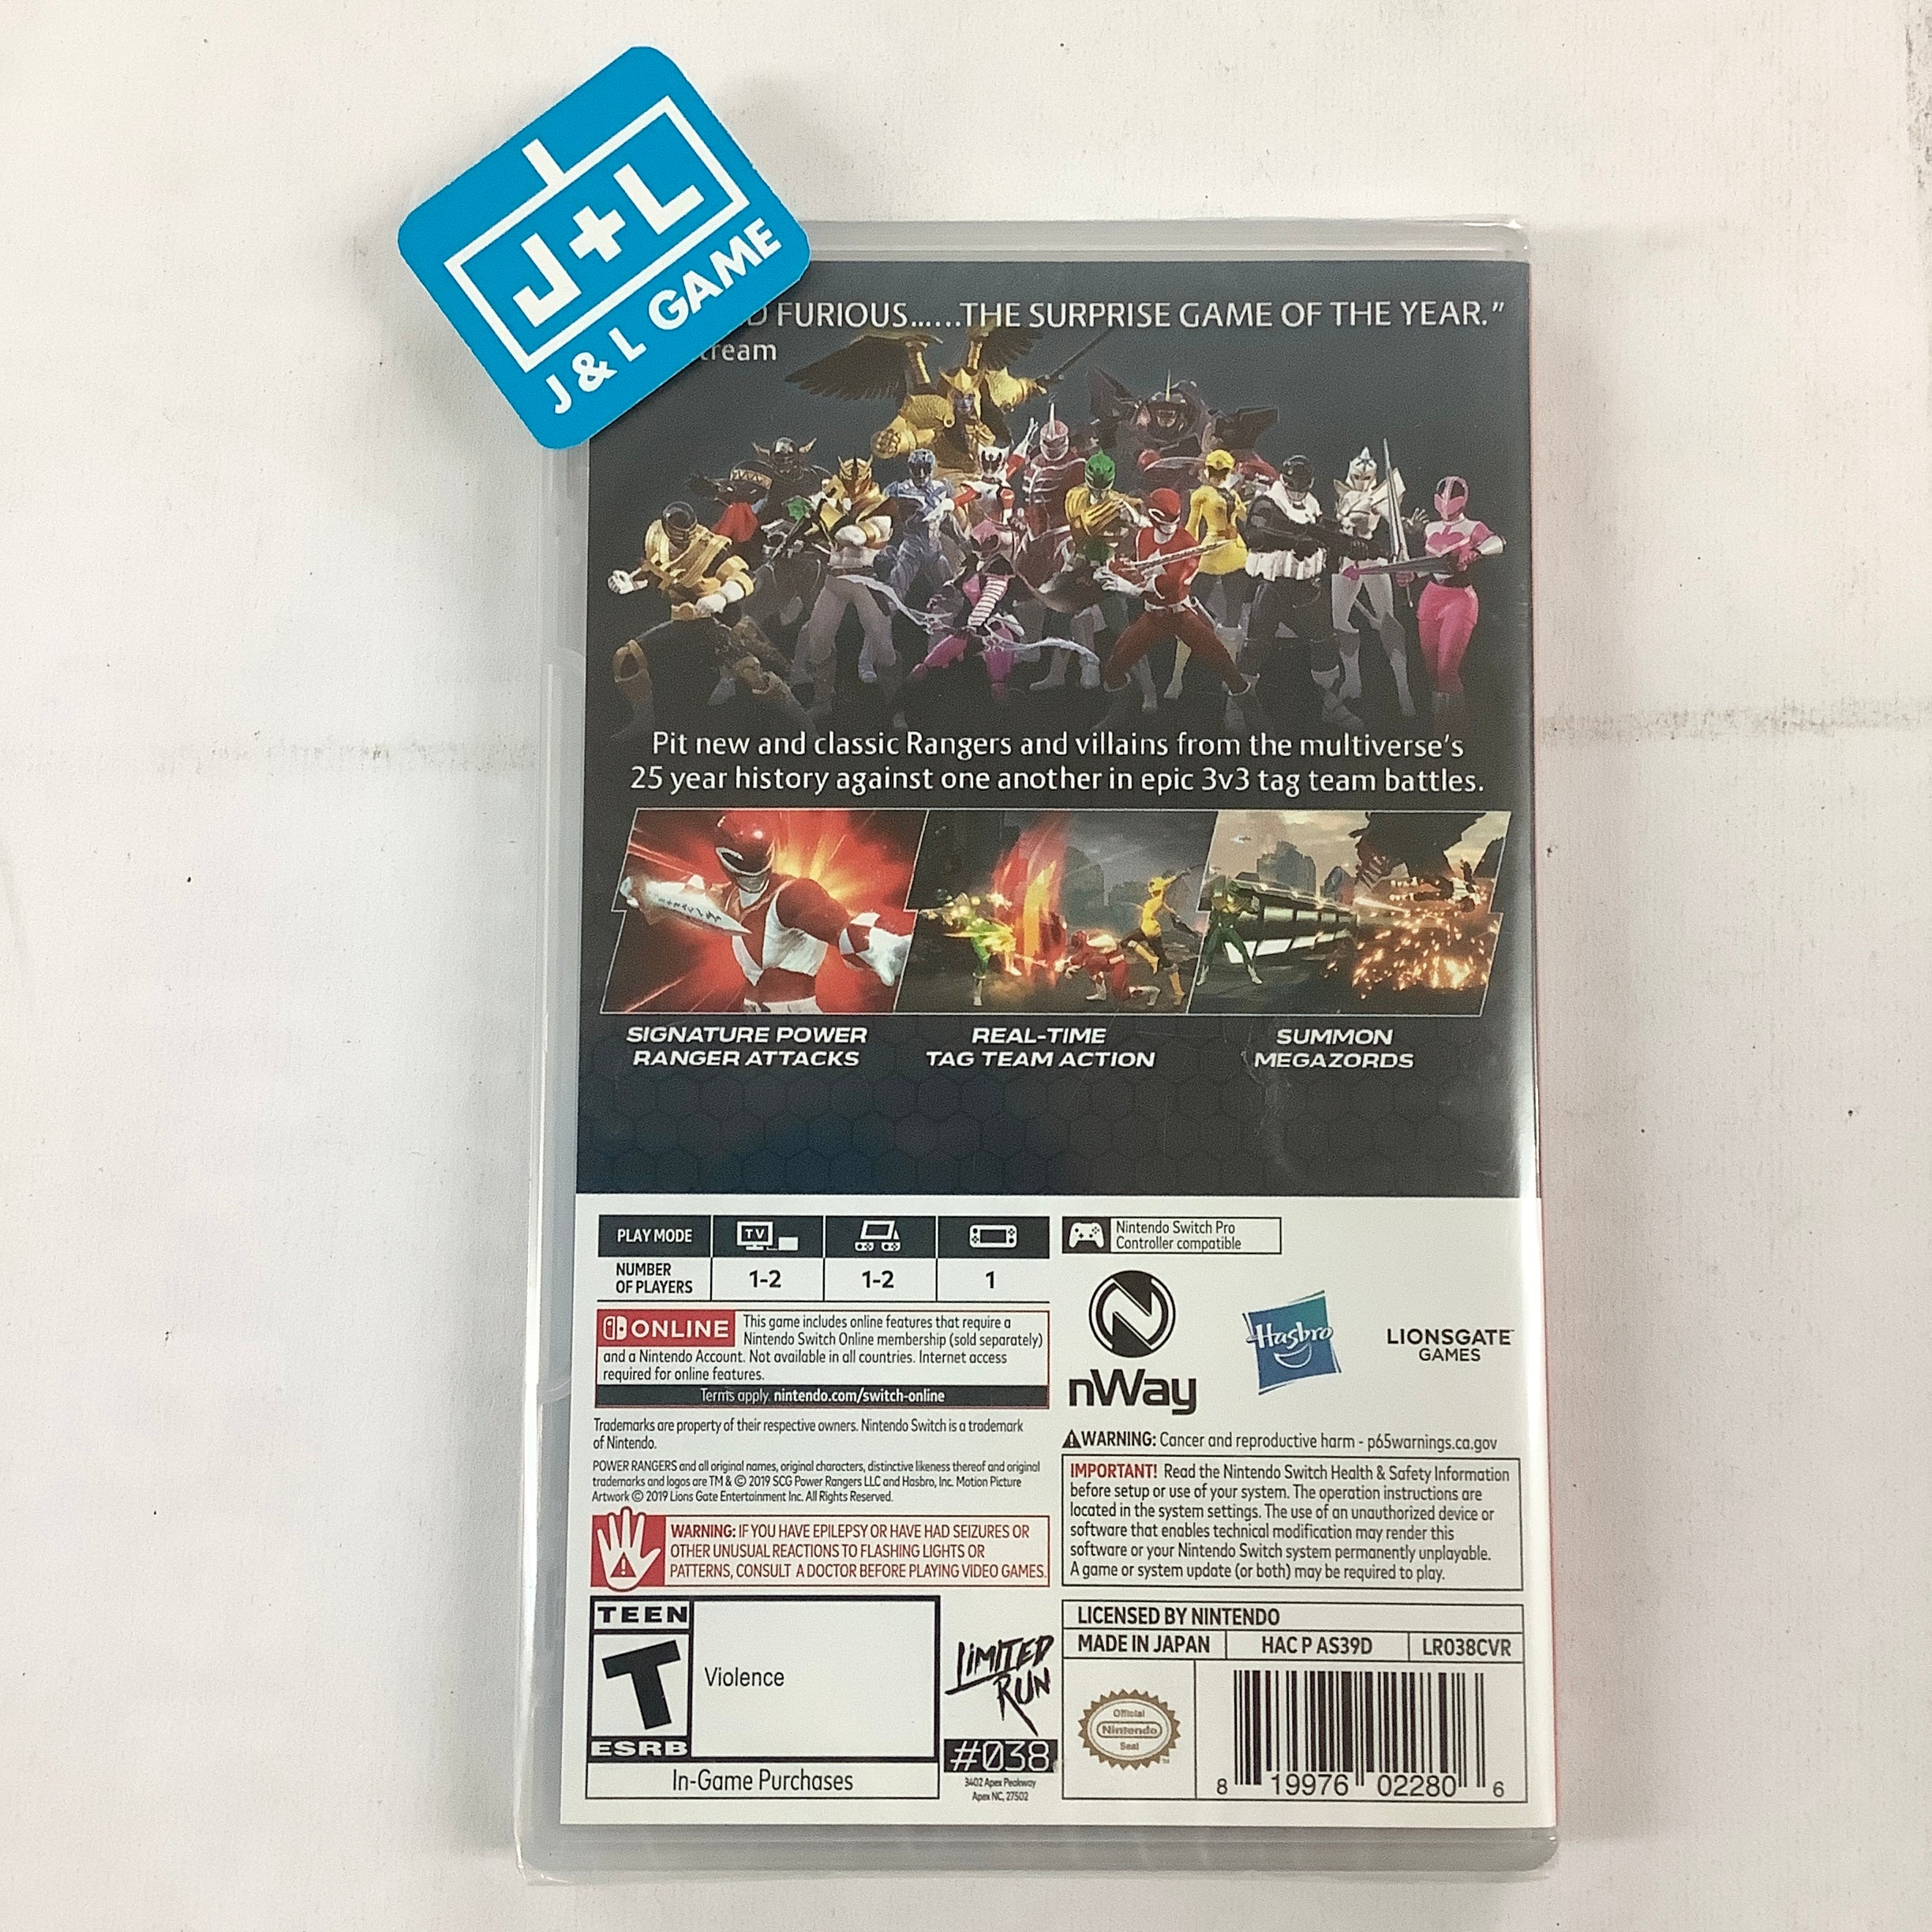 Power Rangers: Battle for the Grid (Limited Run #038) - (NSW) Nintendo Switch Video Games Limited Run Games   